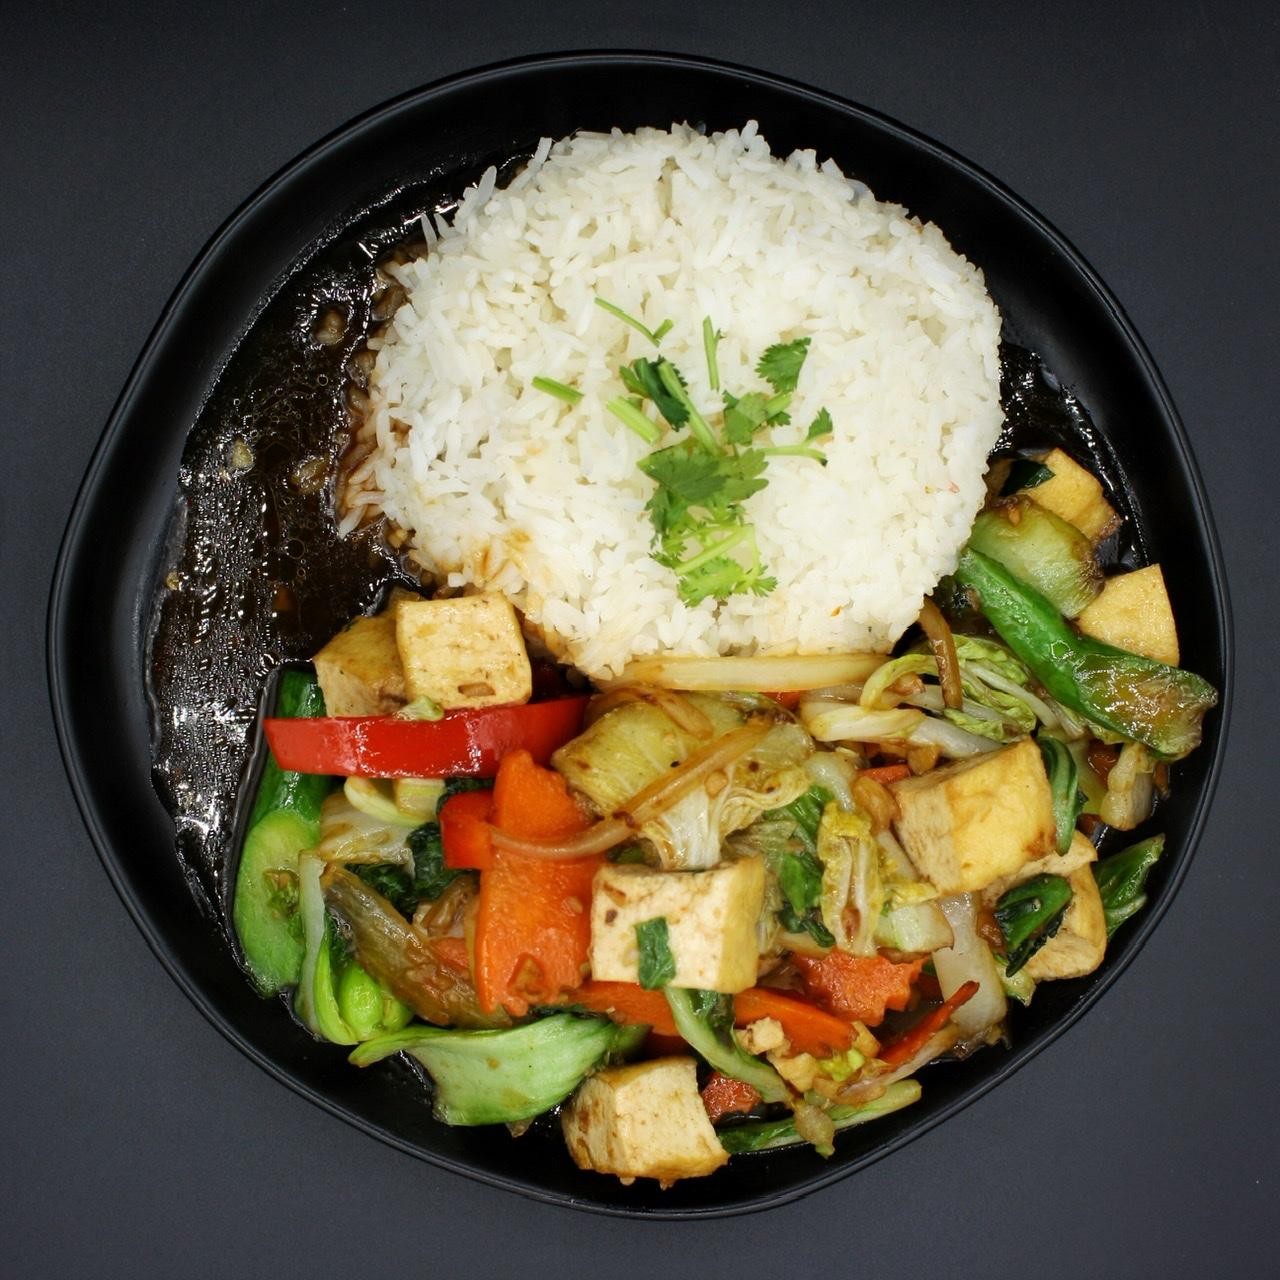 Vegetable and Tofu Delight